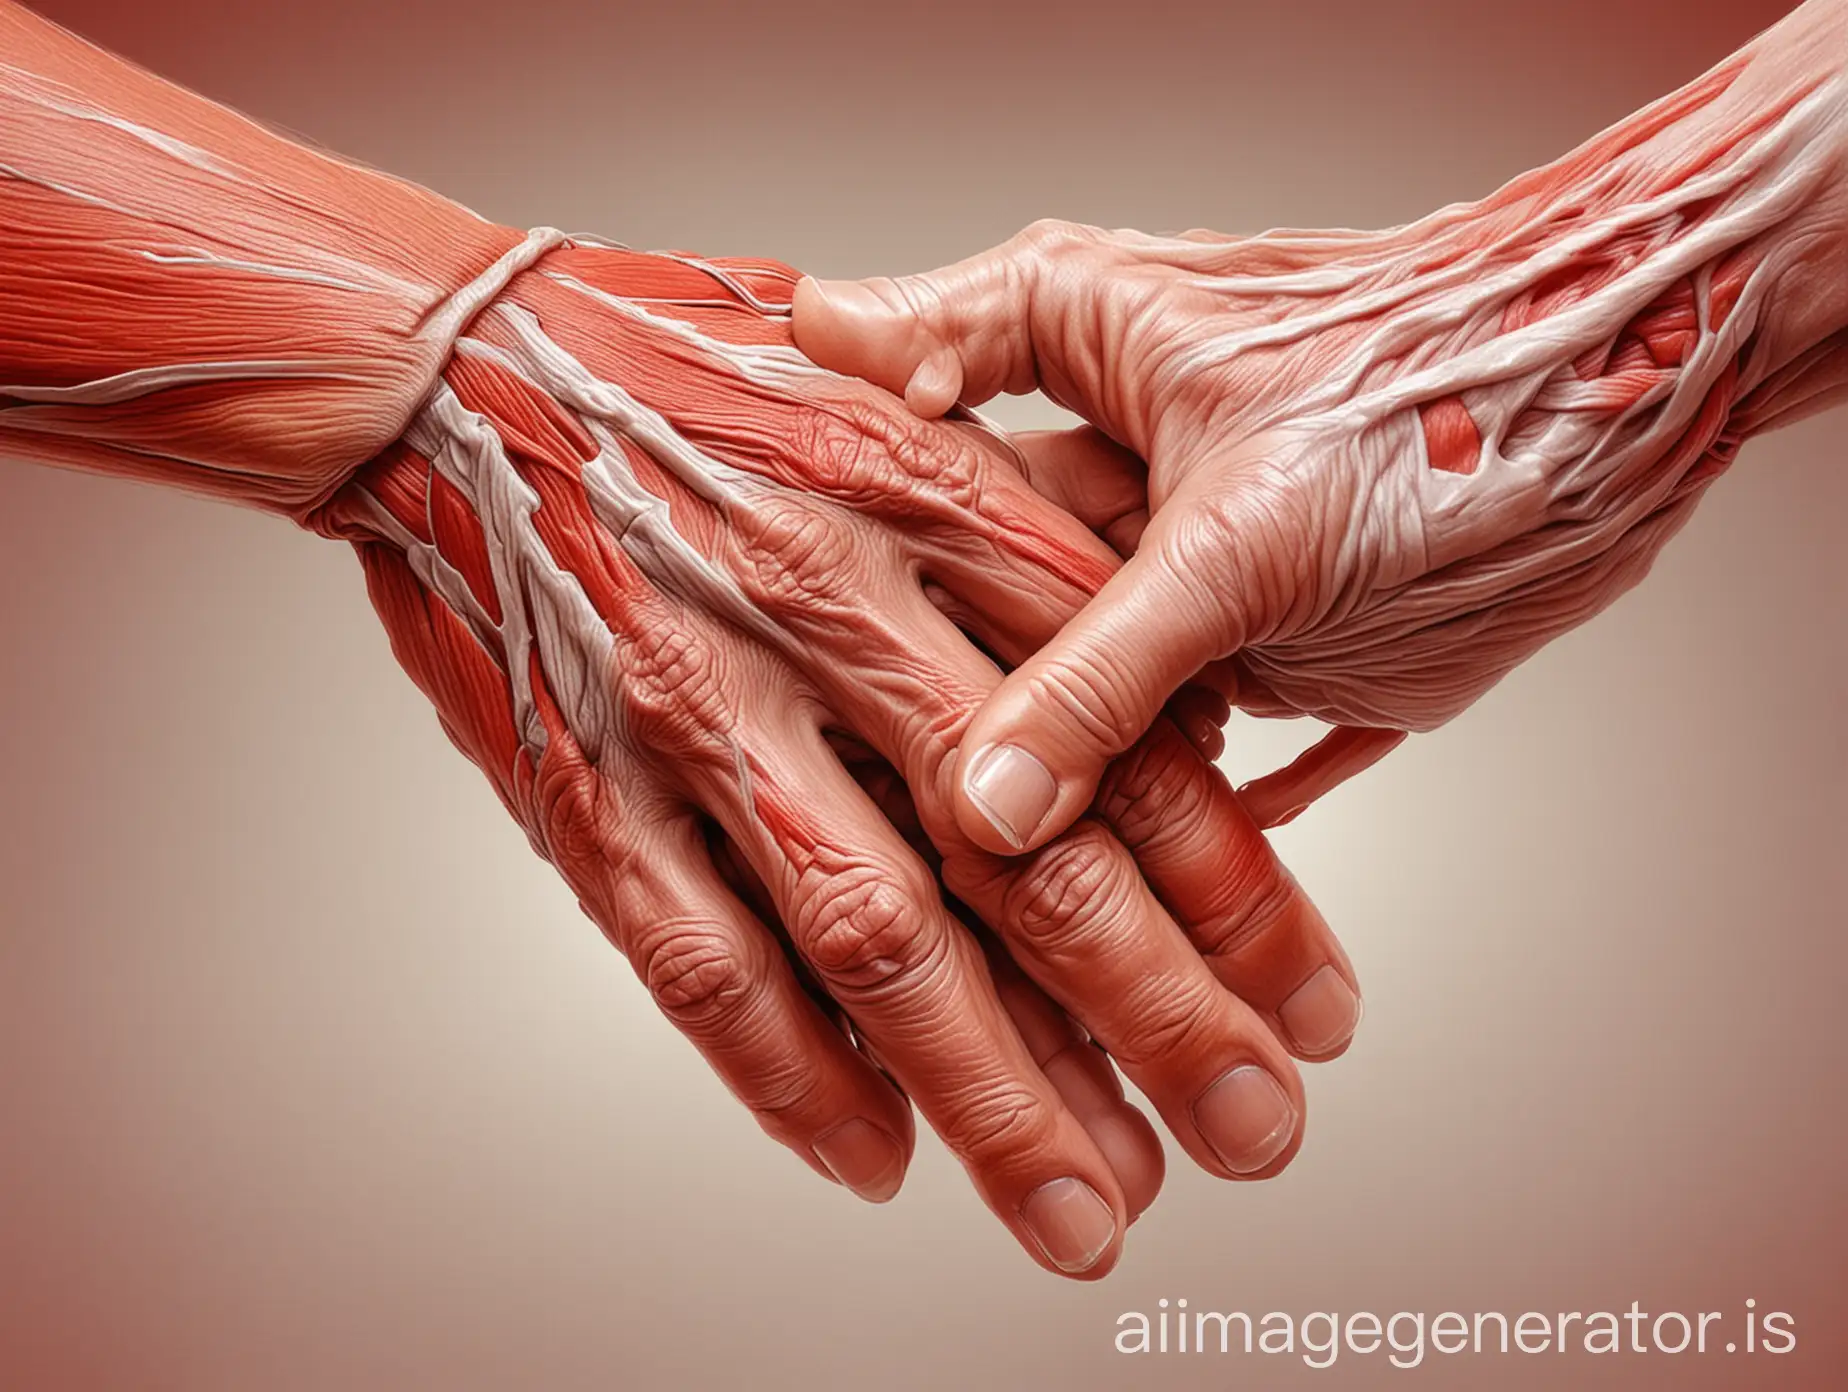 Two hands (realistic-no more than five fingers each), one holding the other one and the tendons and muscles are seen through one of them (drawing). The colors should be natural (muscles in red, tendons in white, the skin flesh-colored). Colorful background